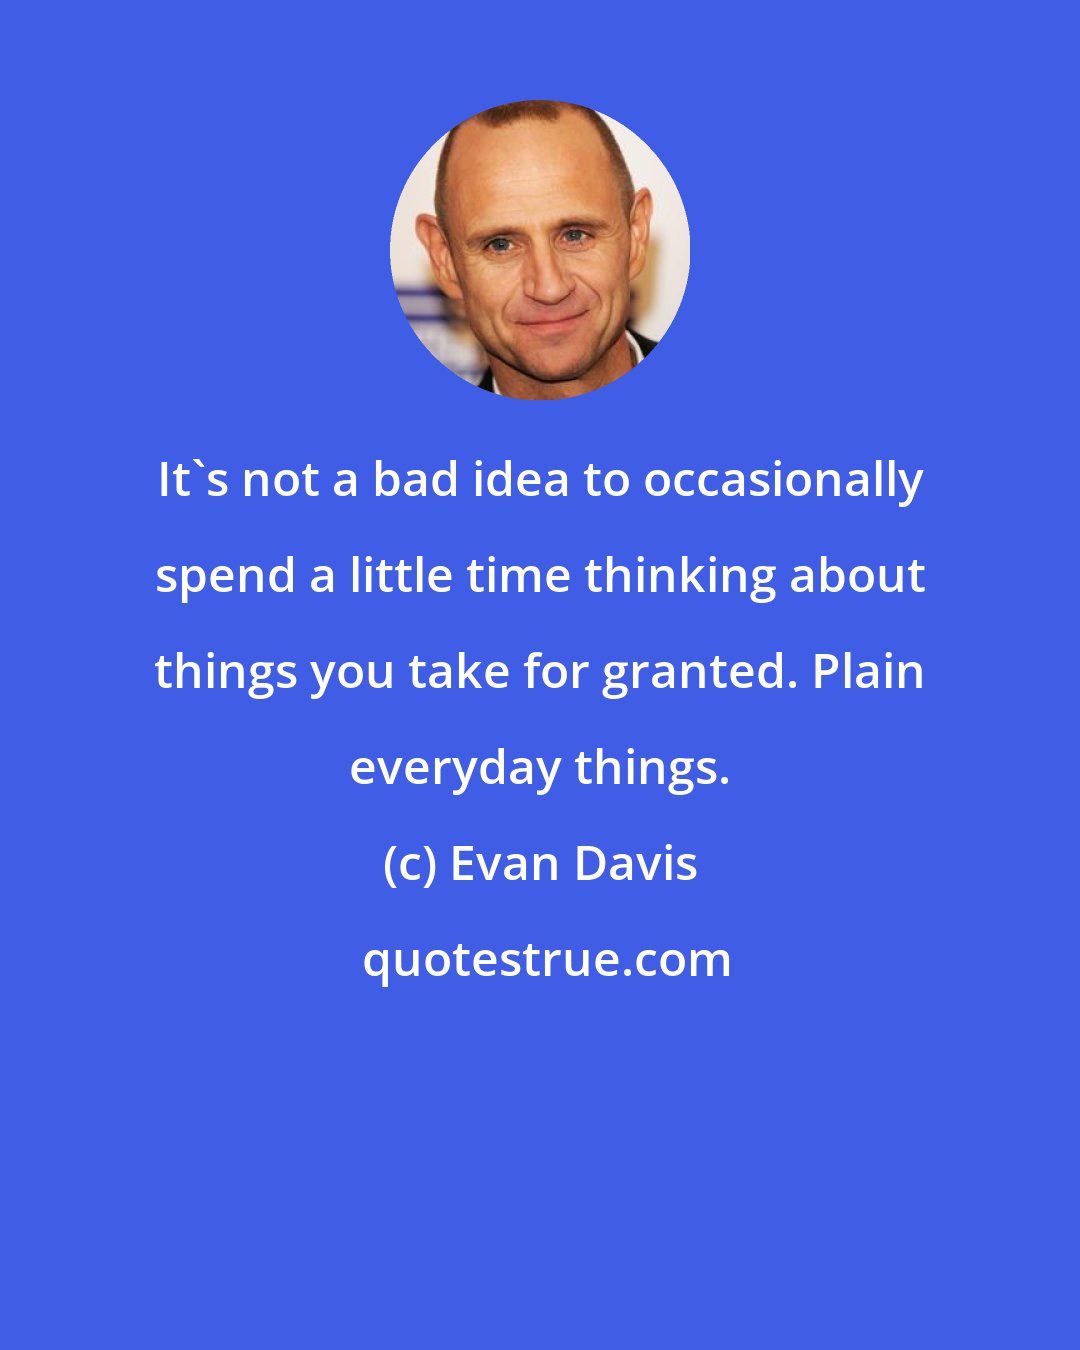 Evan Davis: It's not a bad idea to occasionally spend a little time thinking about things you take for granted. Plain everyday things.